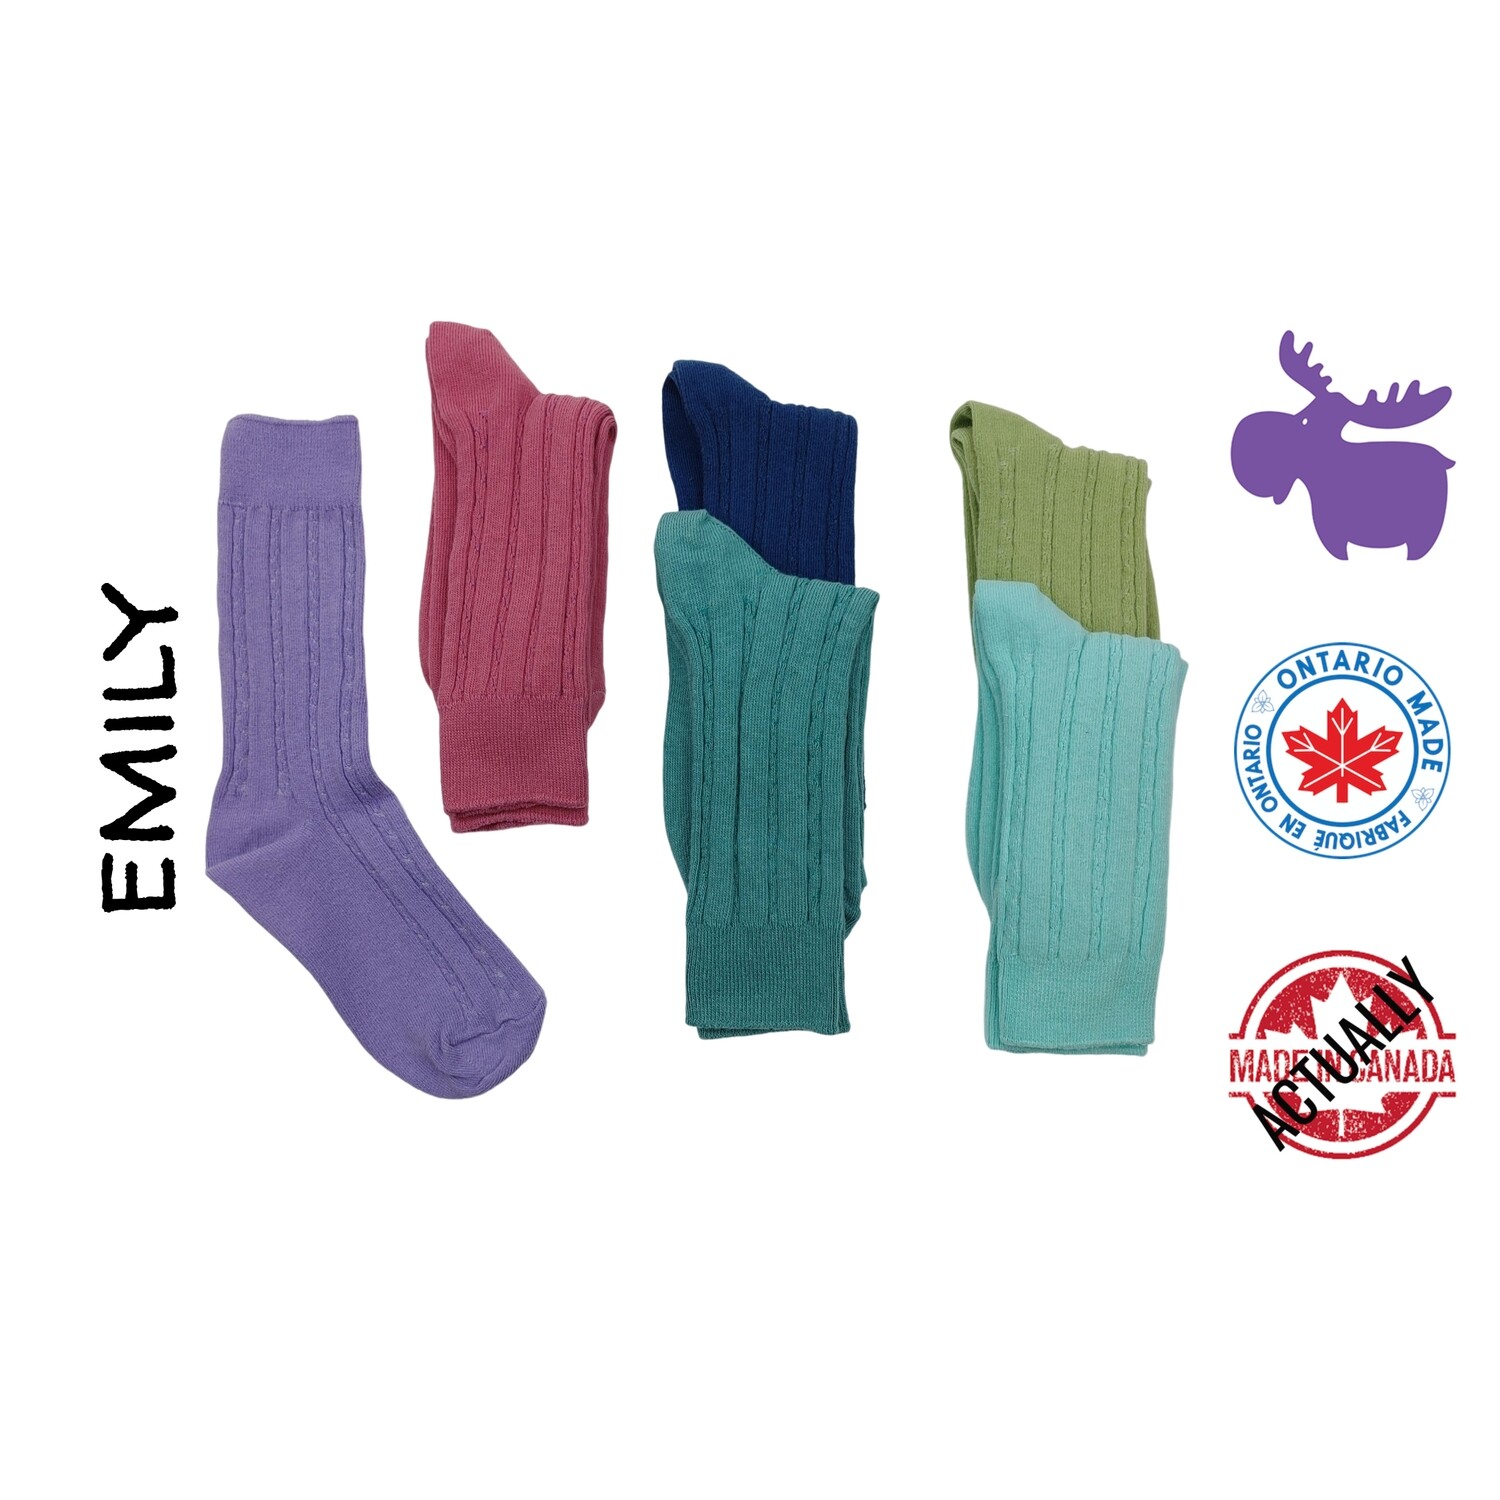 Emily Cable Knit Crew Sock in 6 colors